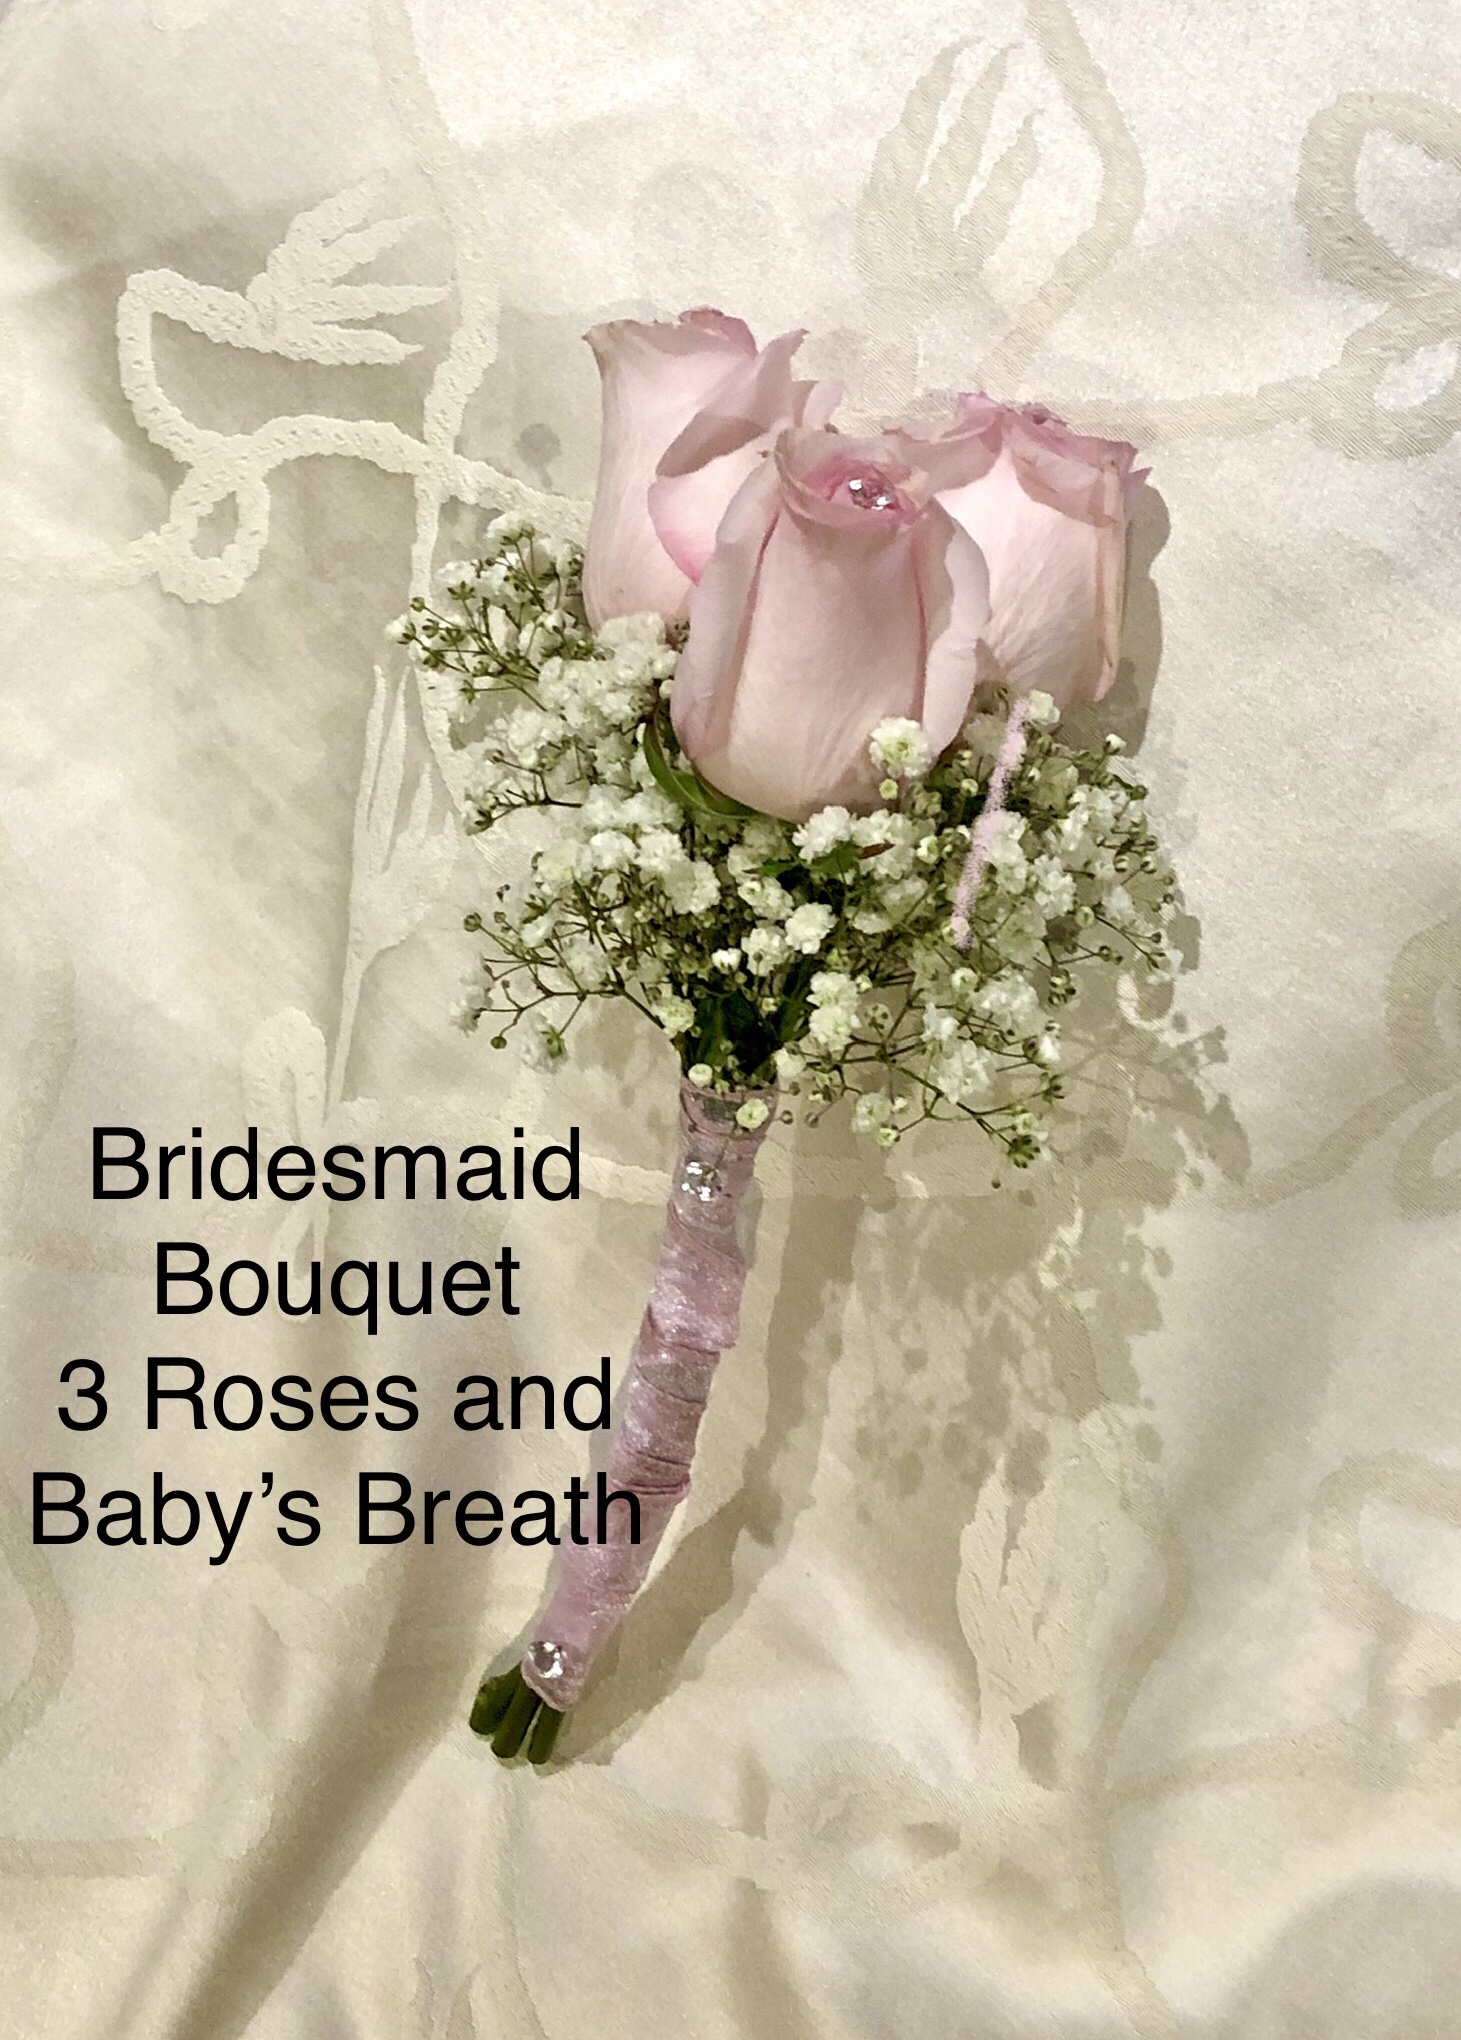 $35 - Bridesmaid Bouquet 3 Roses and Babies Breath 